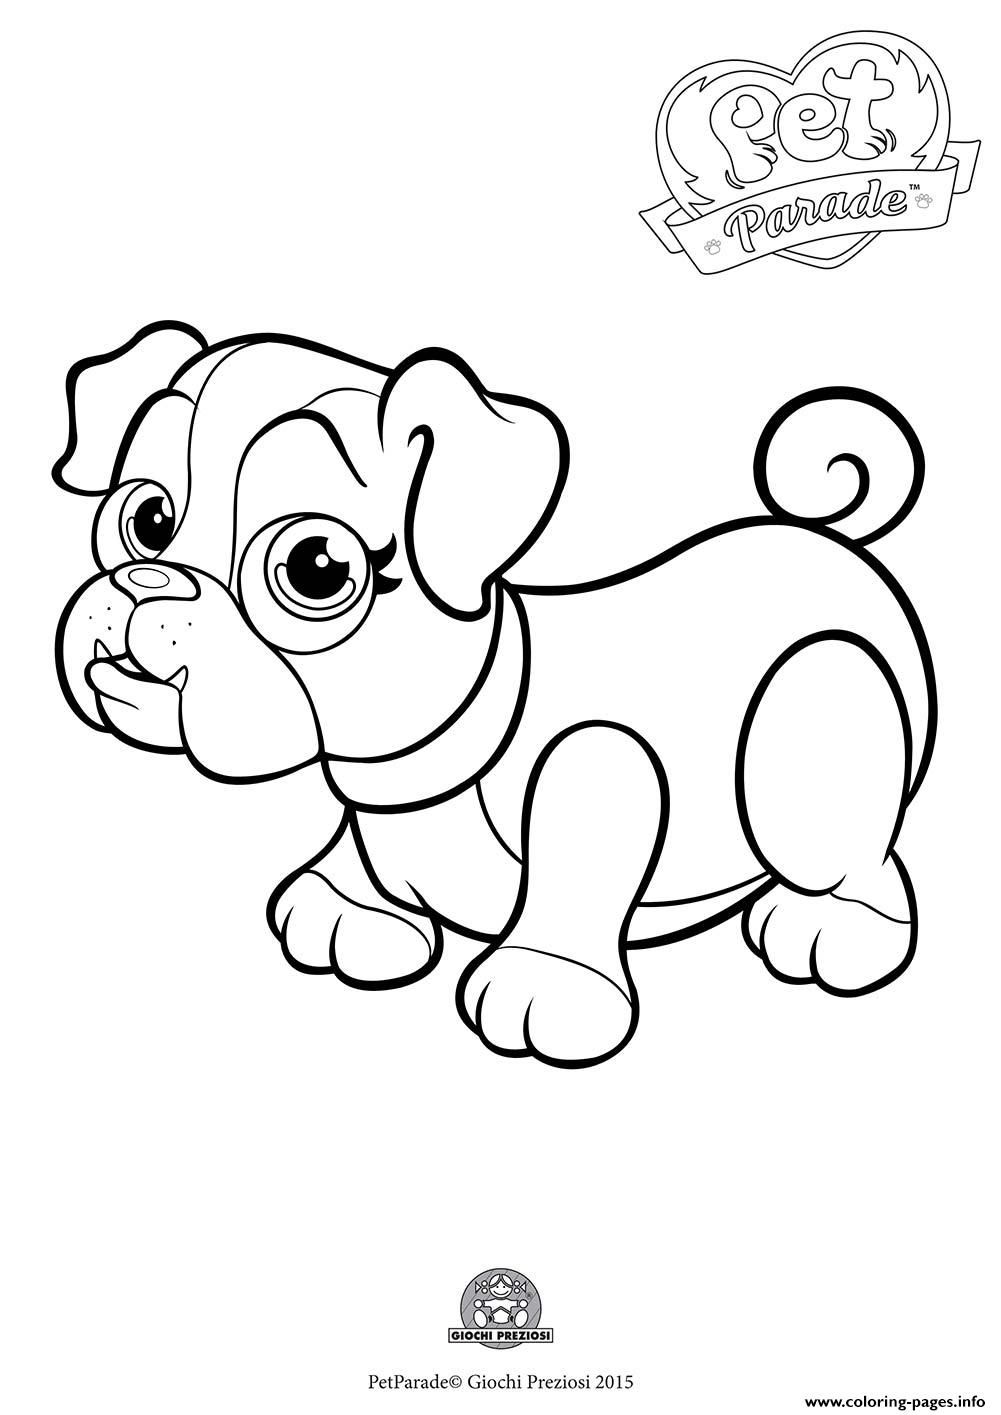 secret-life-of-pets-snowball-drawing-clip-art-library